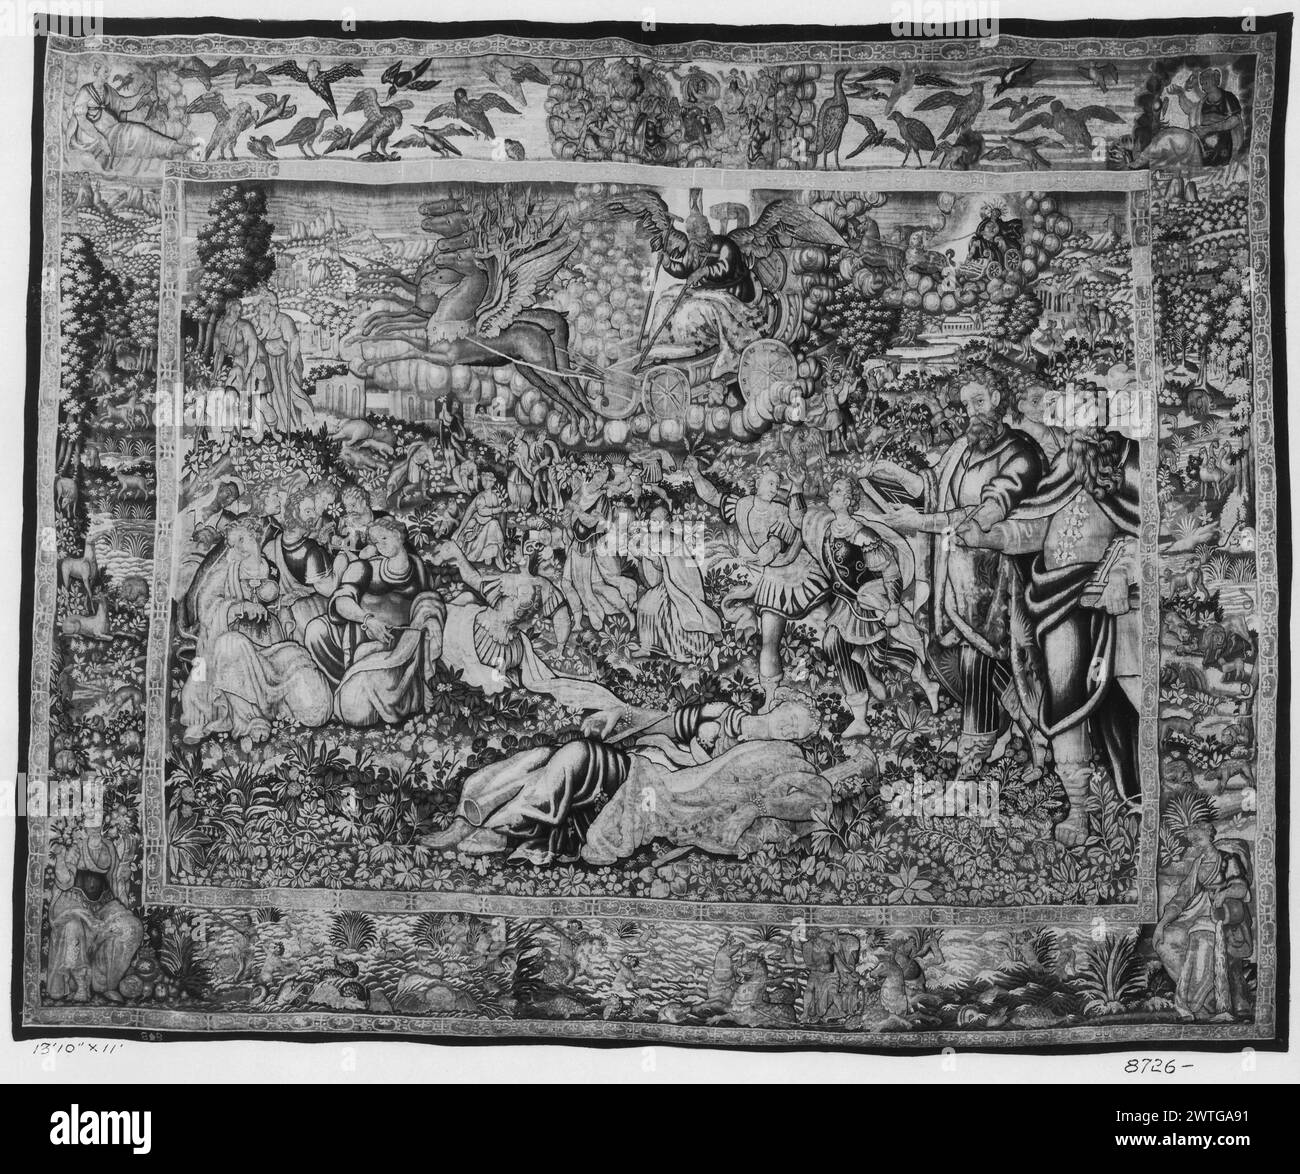 Triumph of Time over Fame. unknown c. 1590-1610 Tapestry Dimensions: H 11' x W 13'10' Tapestry Materials/Techniques: unknown Culture: Flemish Weaving Center: Brussels Ownership History: French & Co. Inscriptions: City mark on lower guard, left Figure of Time as old man with crutches in chariot driven by mythical creatures [like winged reindeer] (top), various figures surround Fame (?) who lies on ground (center, foreground), cityscape (background) (BRD) vignette scenes of figures in landscapes with many animals (various birds, camels, deer, various sea animals, some mythological), framed by 2 Stock Photo